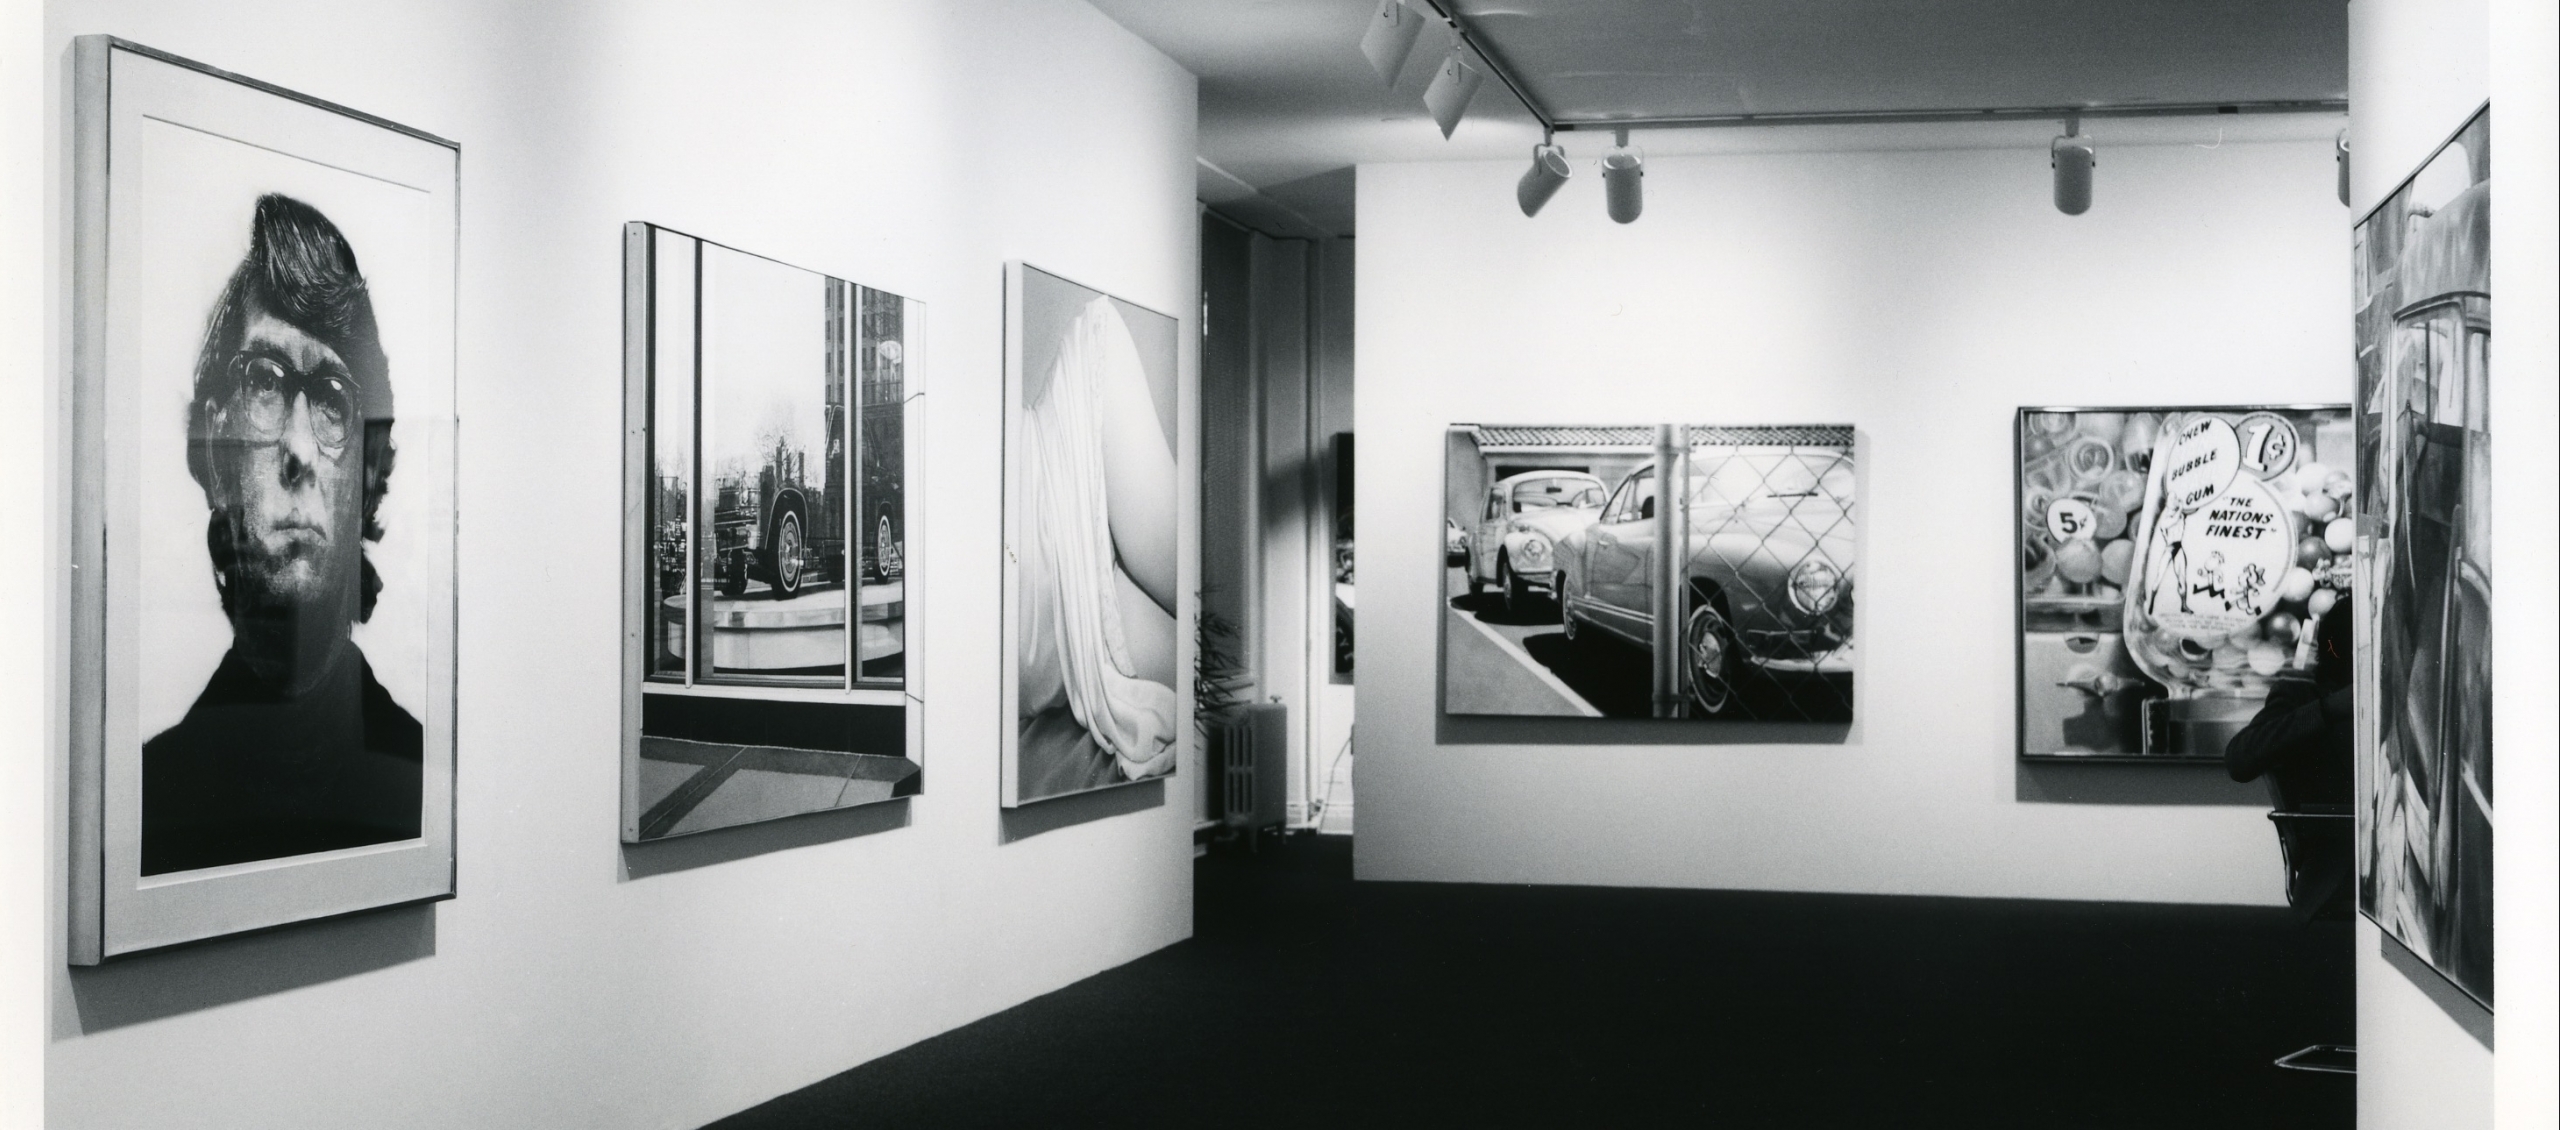 Installation view at Young Hoffman Gallery, Inaugural Exhibition: Realism: Paintings and Drawings, 1976